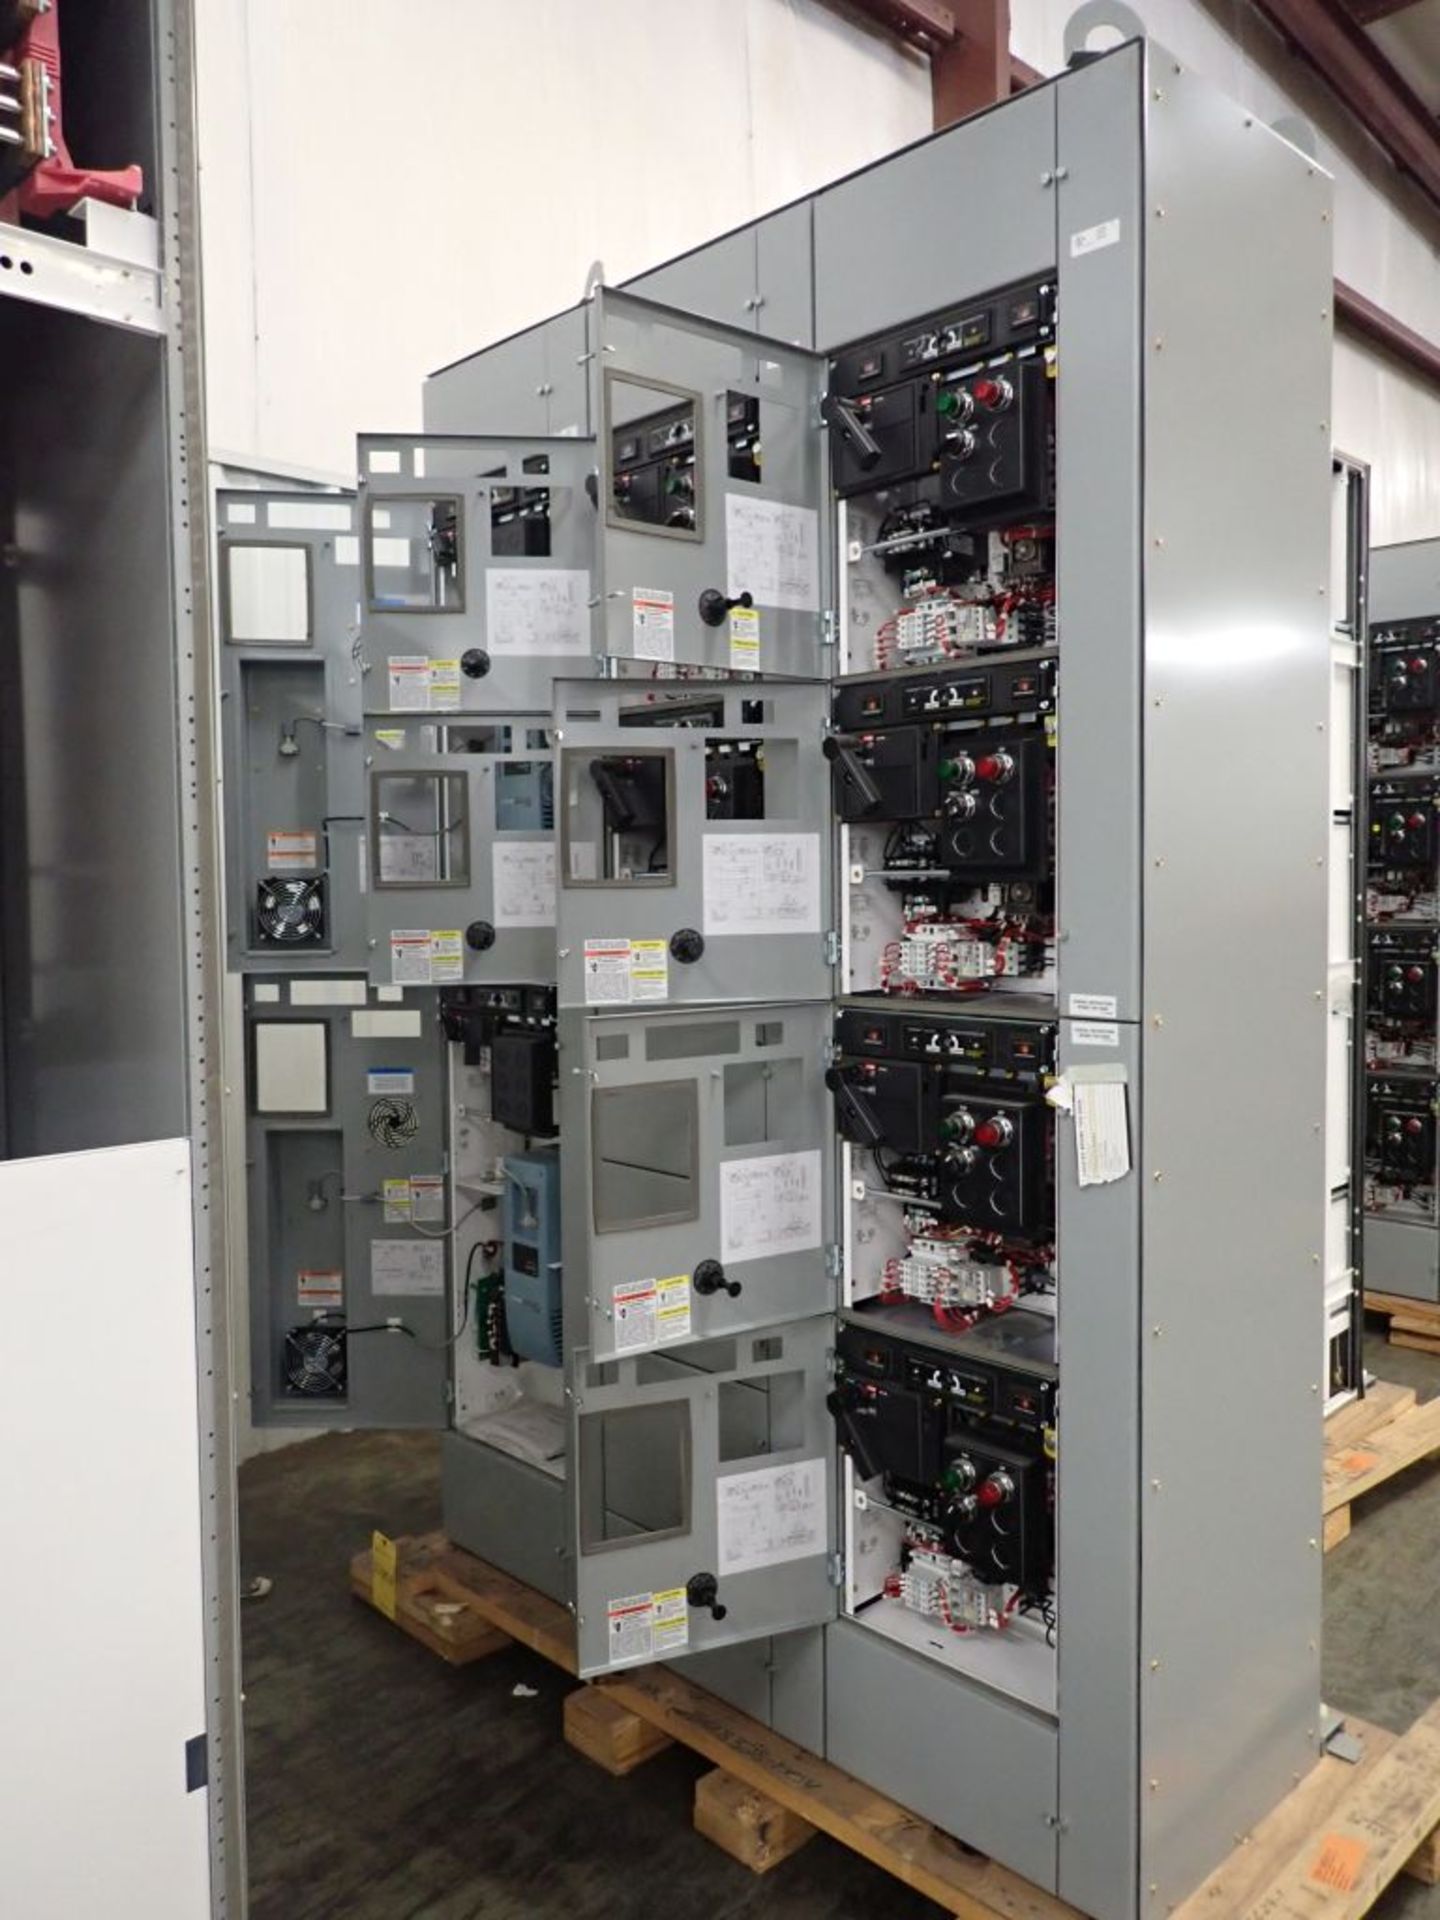 Eaton Freedom 2100 Series Motor Control Center | (2) F206-30A-10HP; (7) F206-15A-10HP; (2) F208-30A; - Image 7 of 102